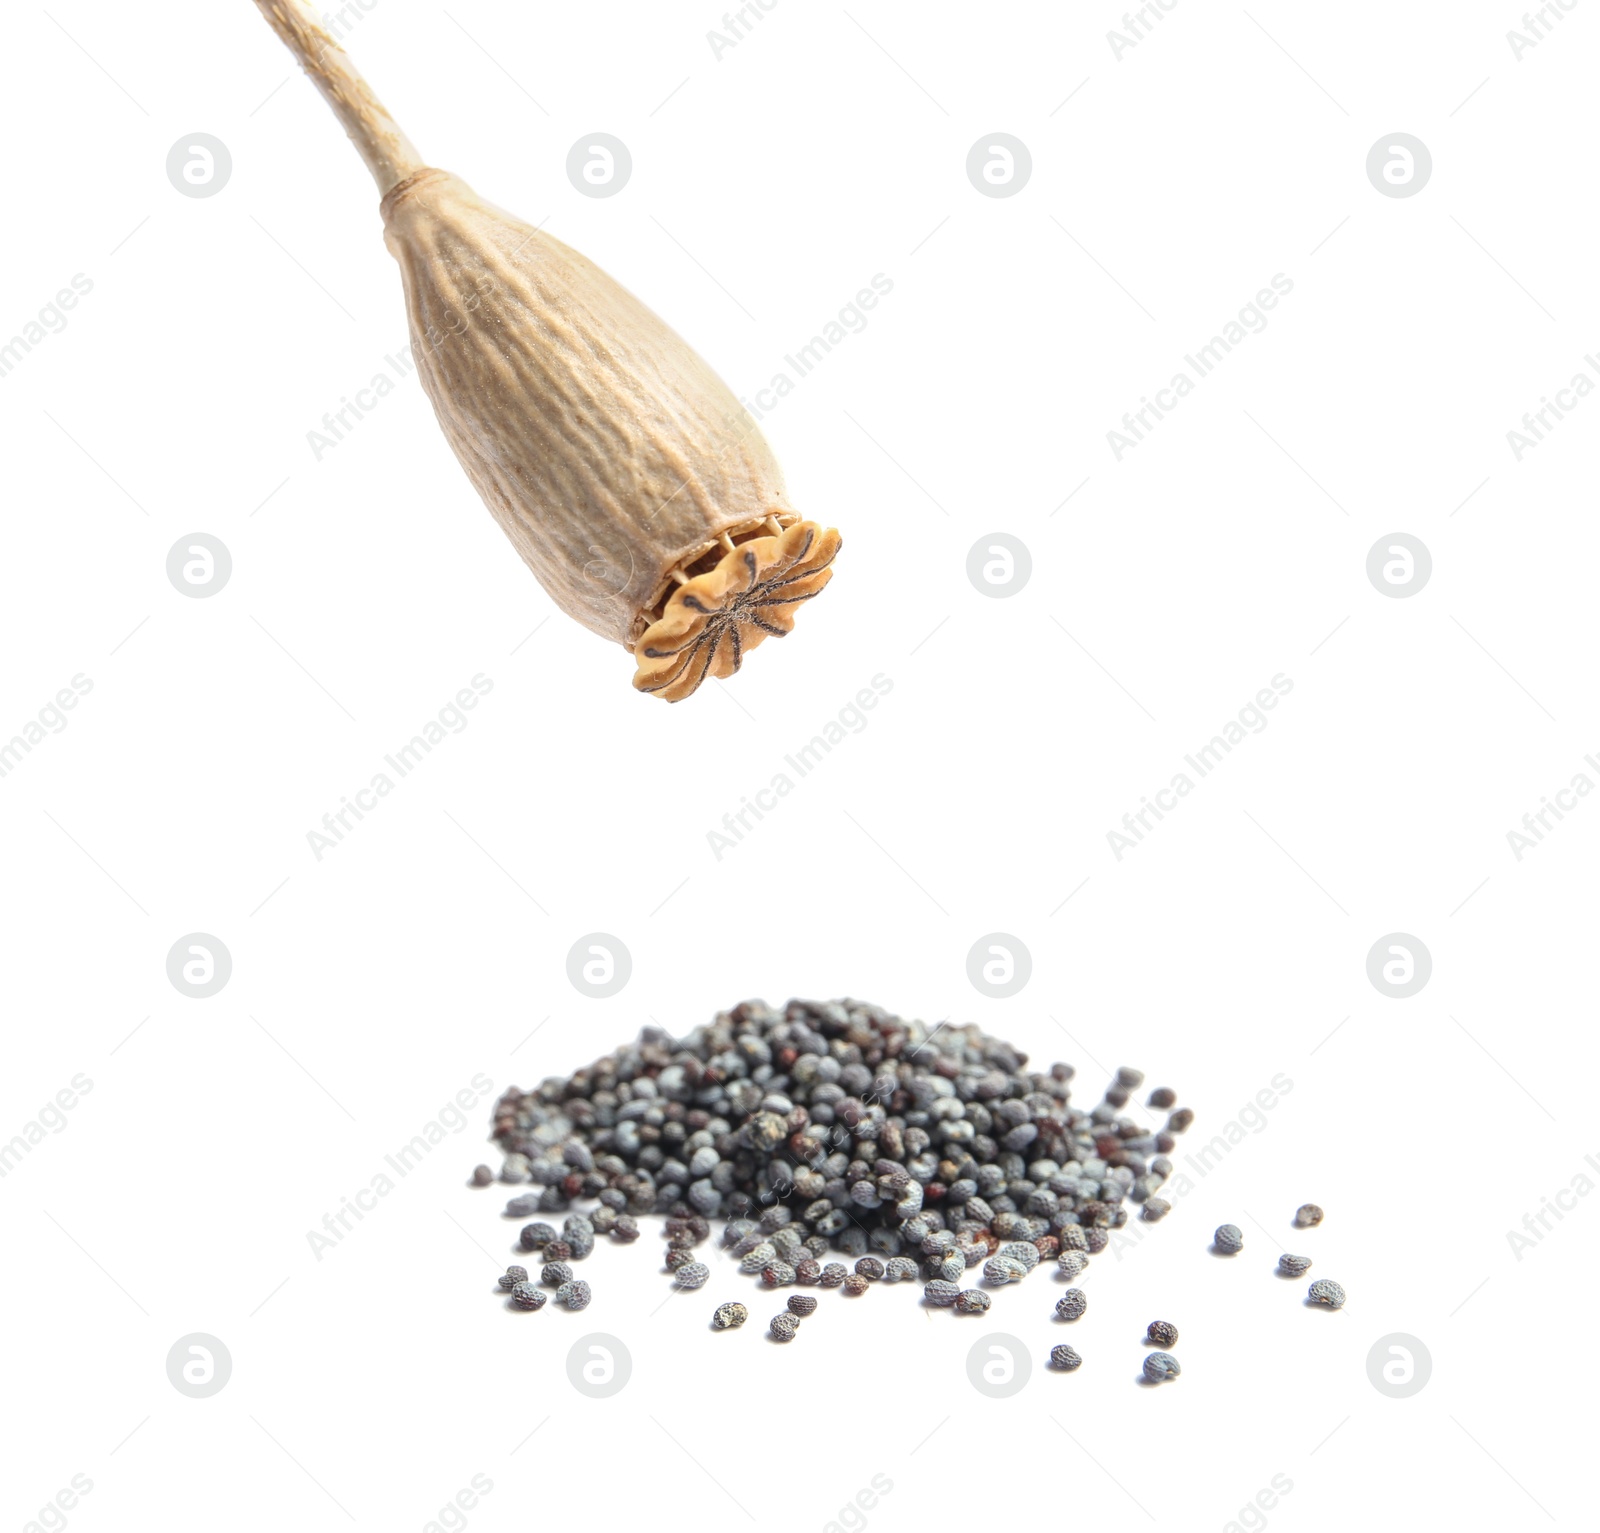 Photo of Dry poppy head and seeds on white background